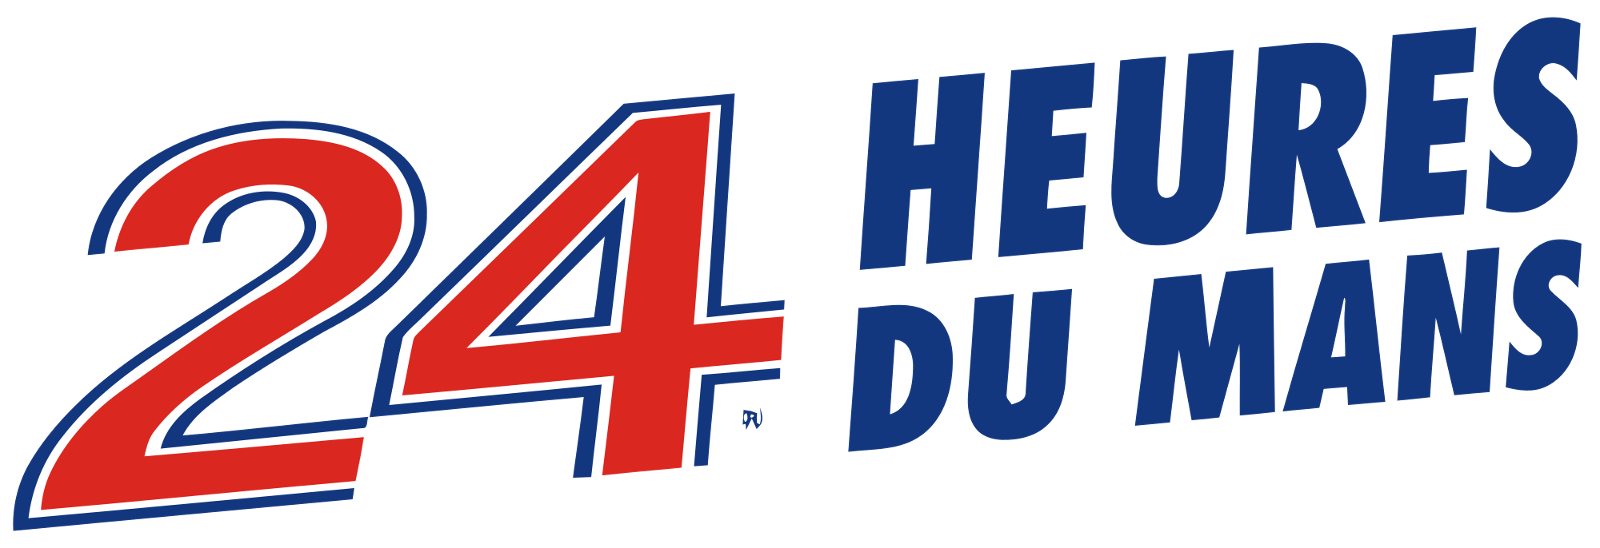 The official logo of the 24 Hours of Le Mans. 